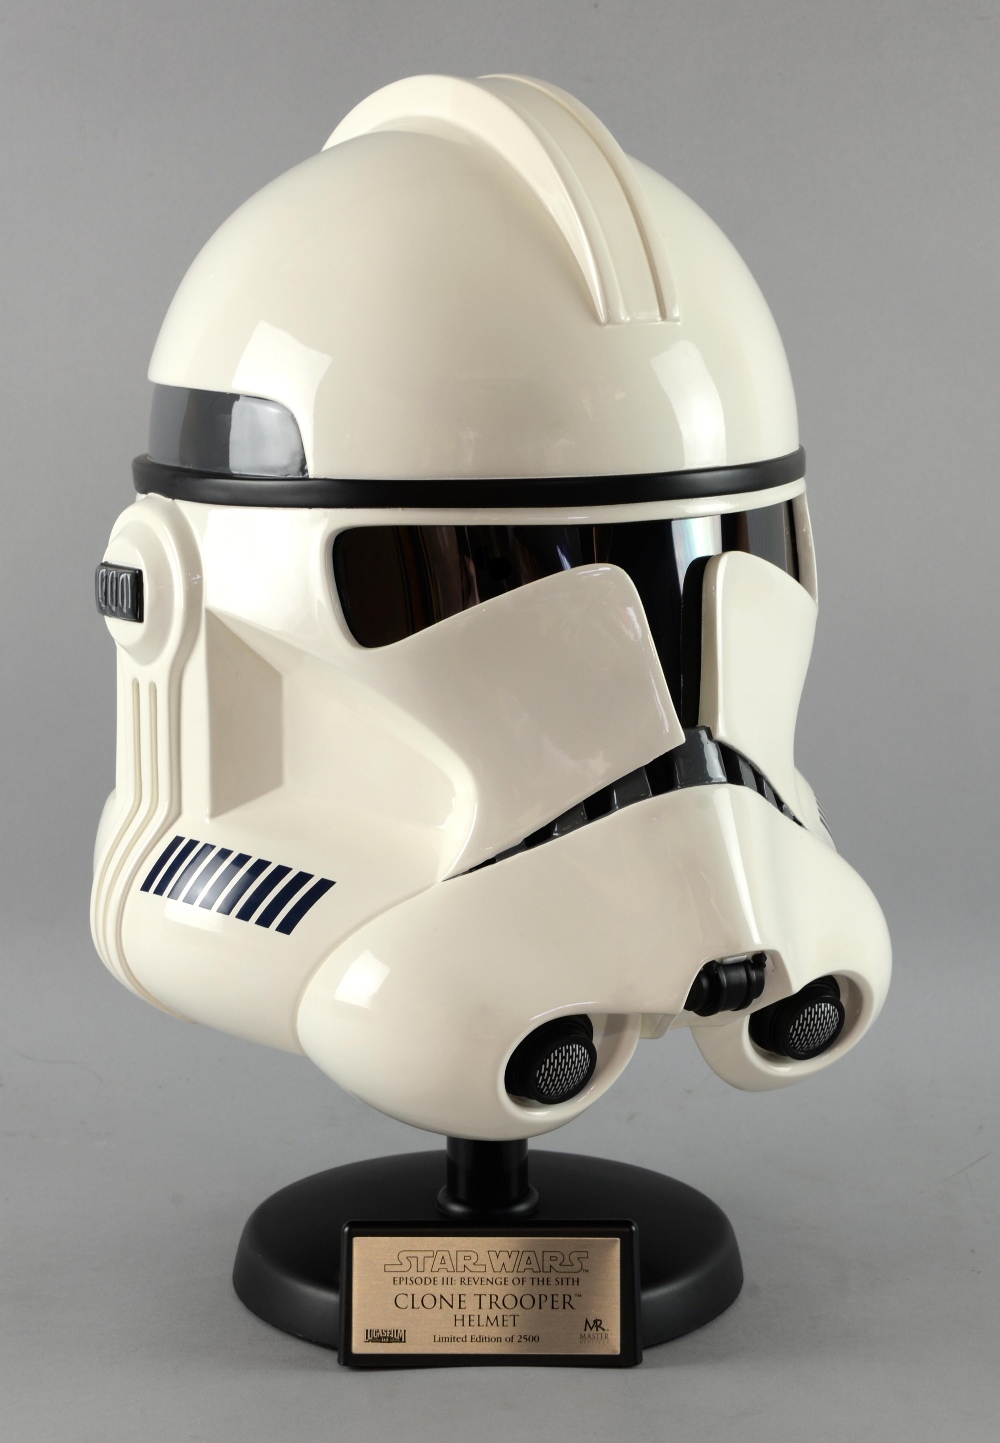 Star Wars - Master Replicas Episode III; Revenge of the Sith Clone Trooper Helmet, Limited Edition - Image 2 of 6